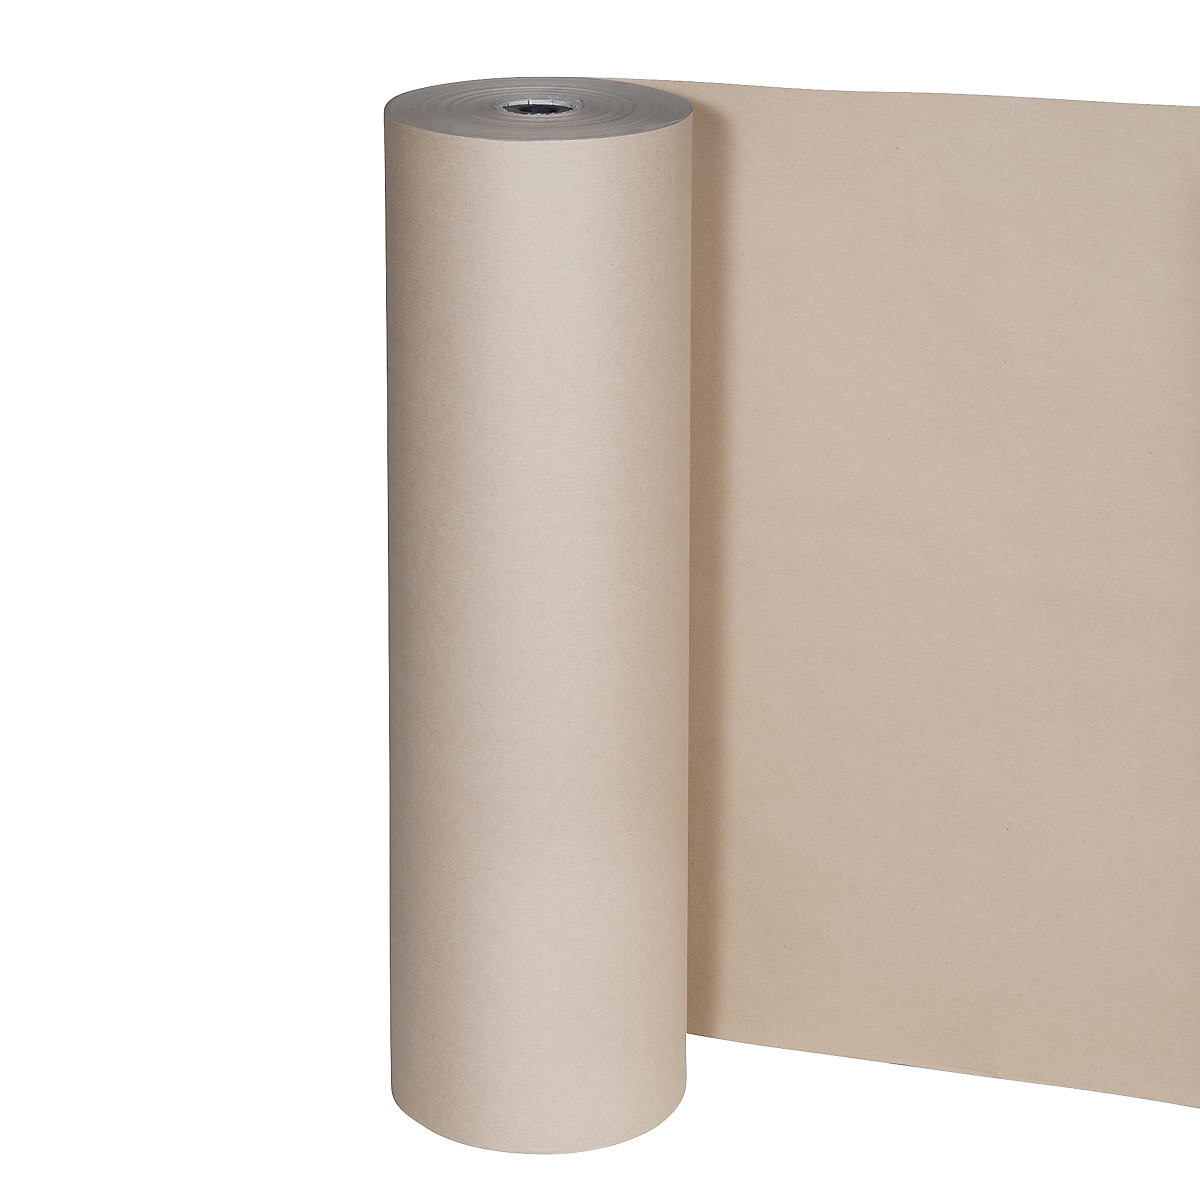 Packing paper, 80 g/m², Secare roll, 750 mm wide, pack of 2 rolls-1